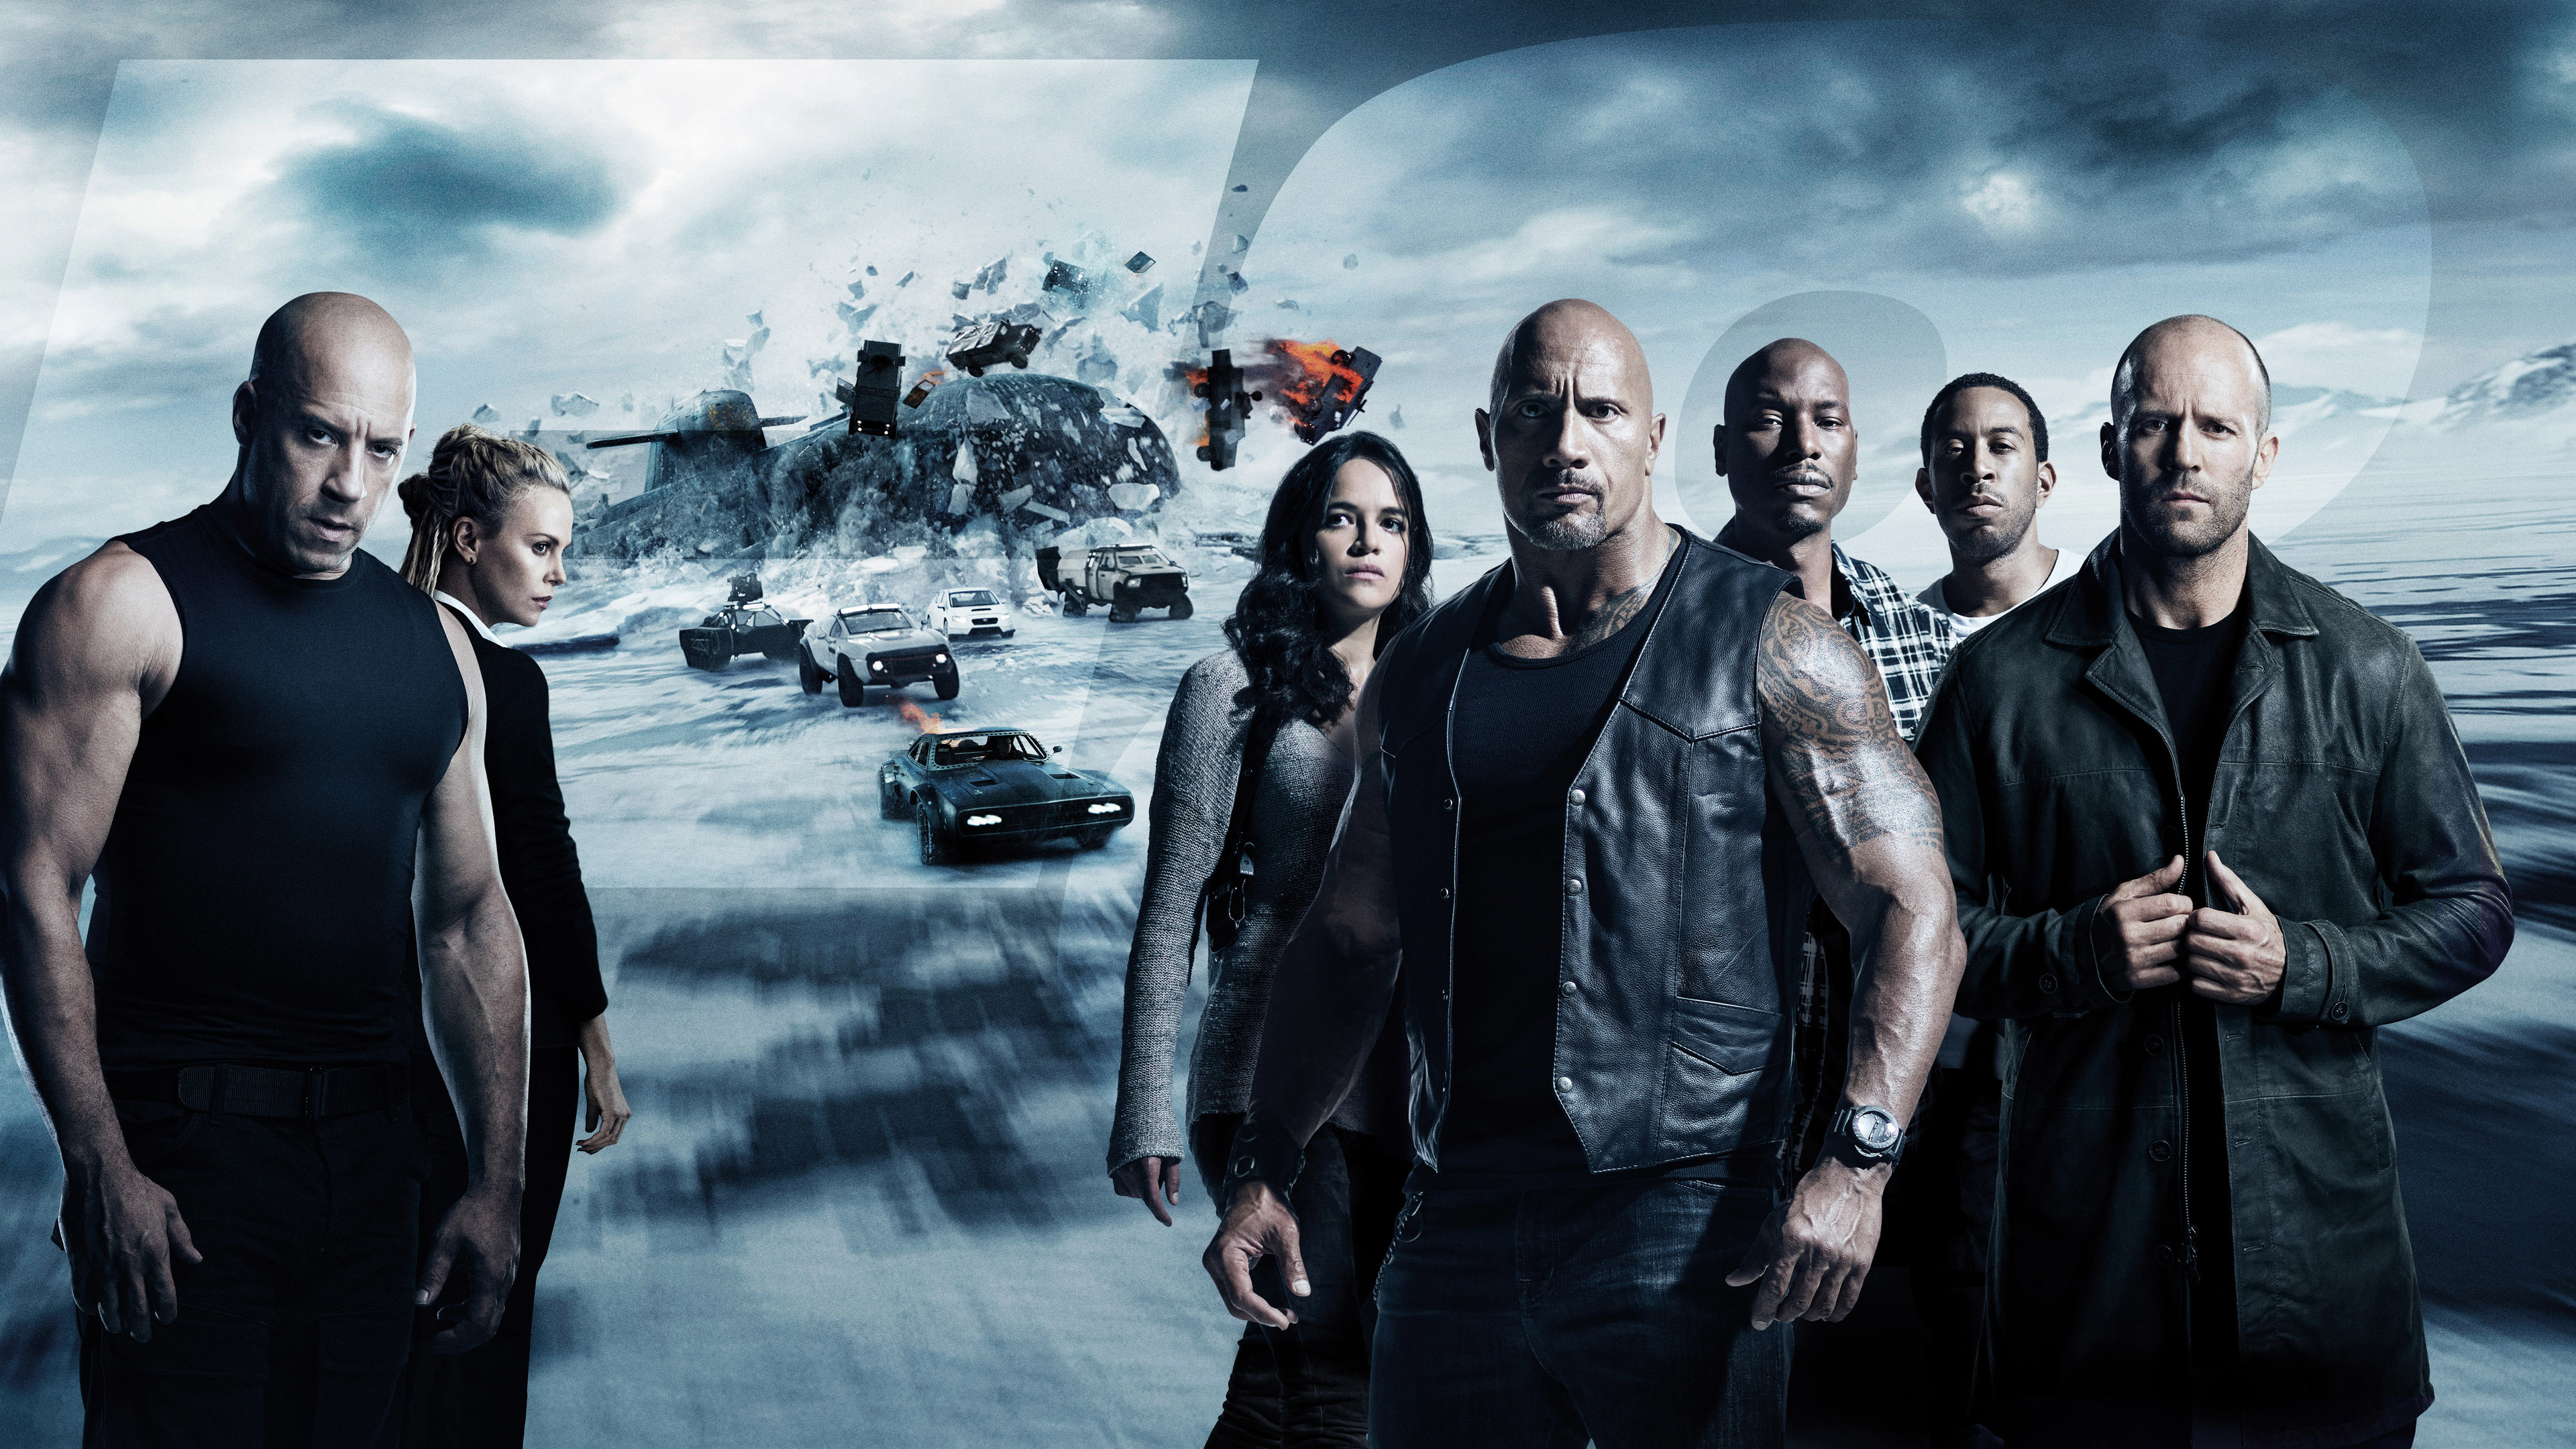 the fate of the furious 2017 5k movie 1536401966 - The Fate Of The Furious 2017 5k Movie - the fate of the furious wallpapers, movies wallpapers, hd-wallpapers, fast and furious wallpapers, fast 8 wallpapers, 5k wallpapers, 4k-wallpapers, 2017 movies wallpapers